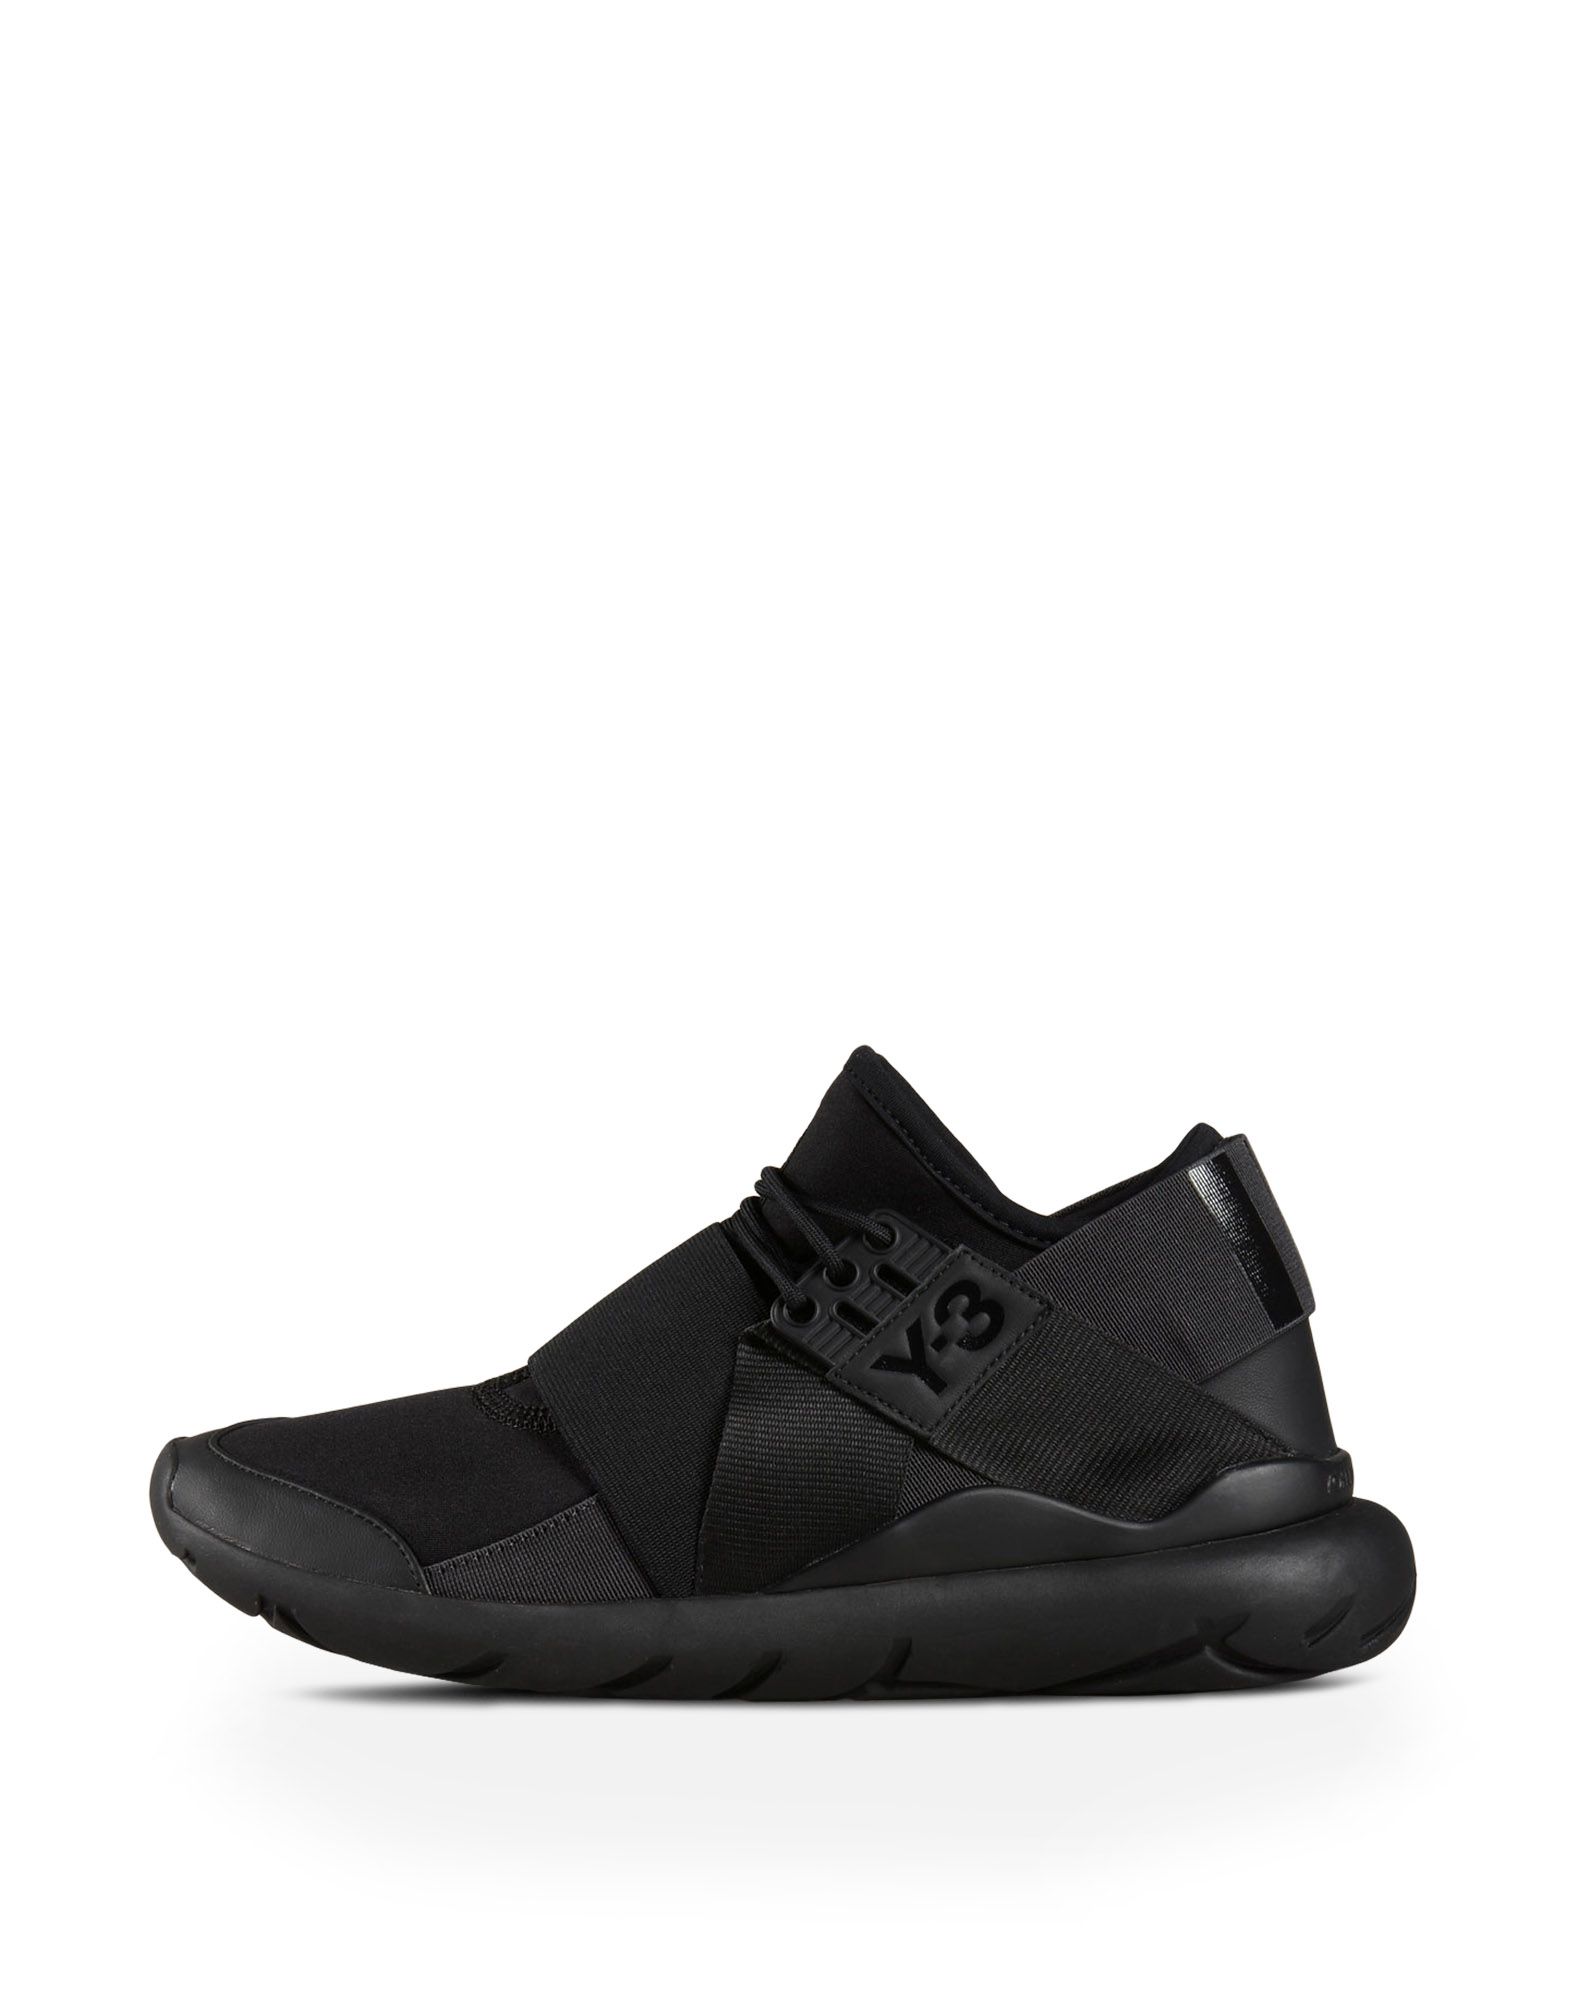 Y 3 QASA LACE for Women | Adidas Y-3 Official Store